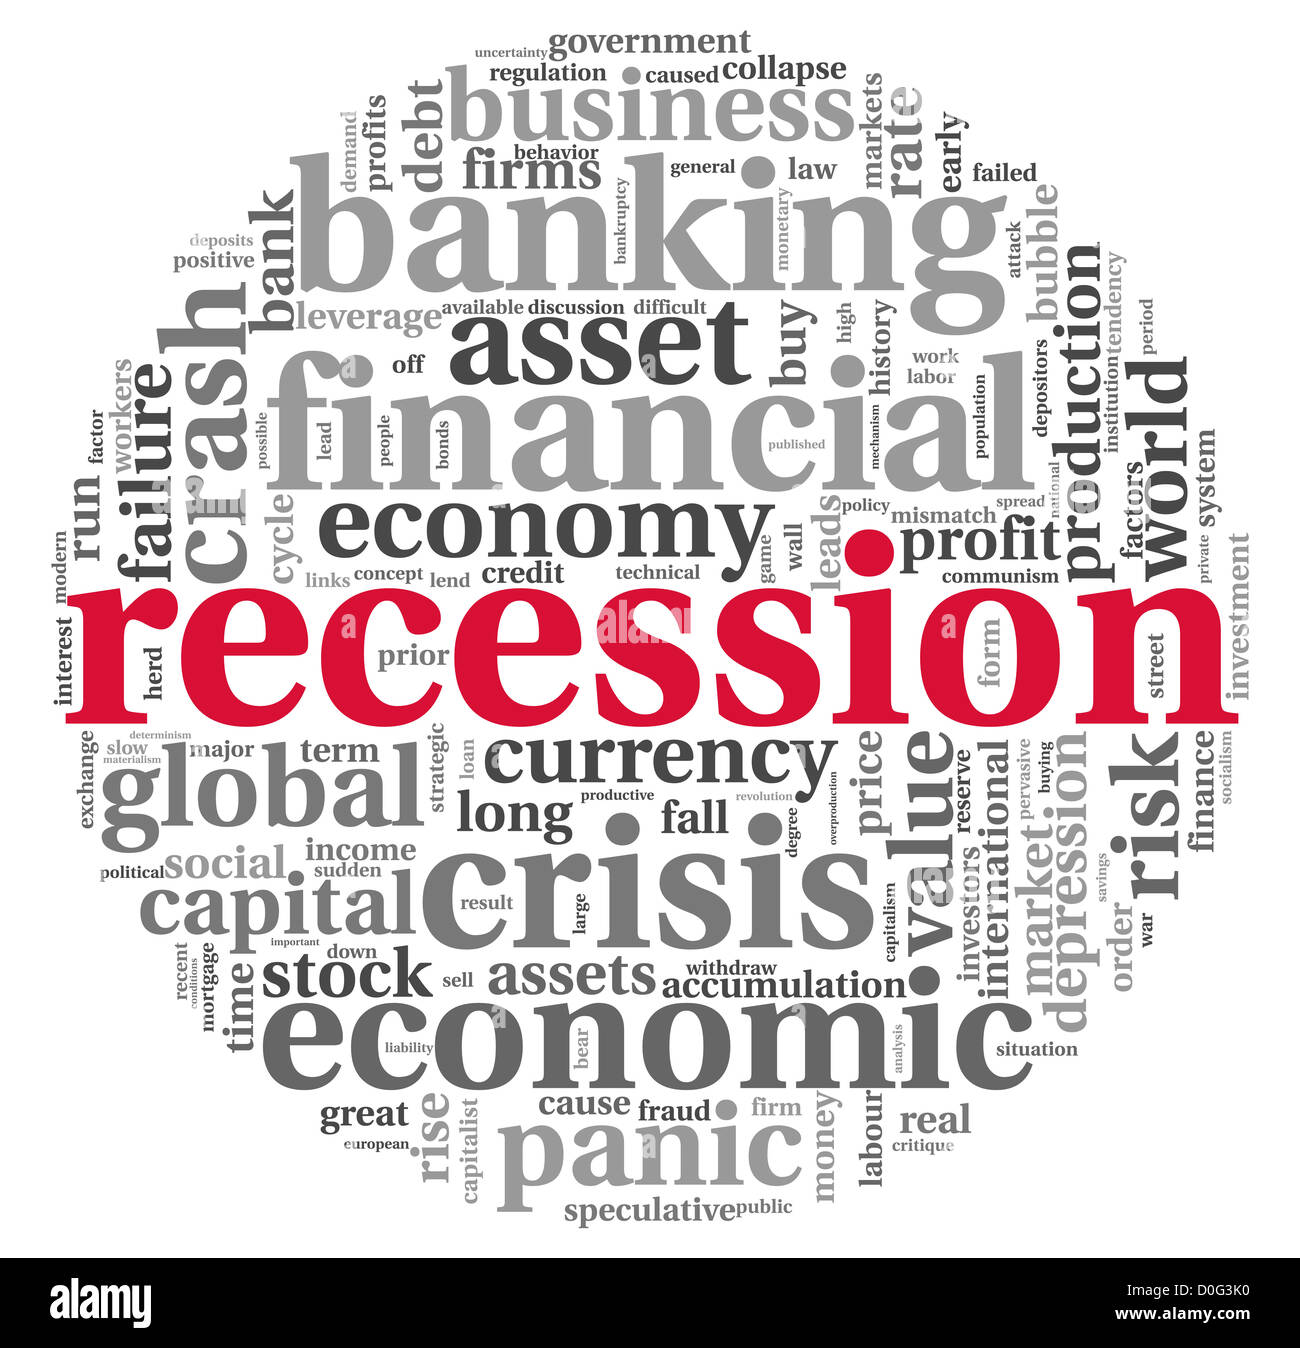 Recession and crisis concept in word tag cloud on white background Stock Photo